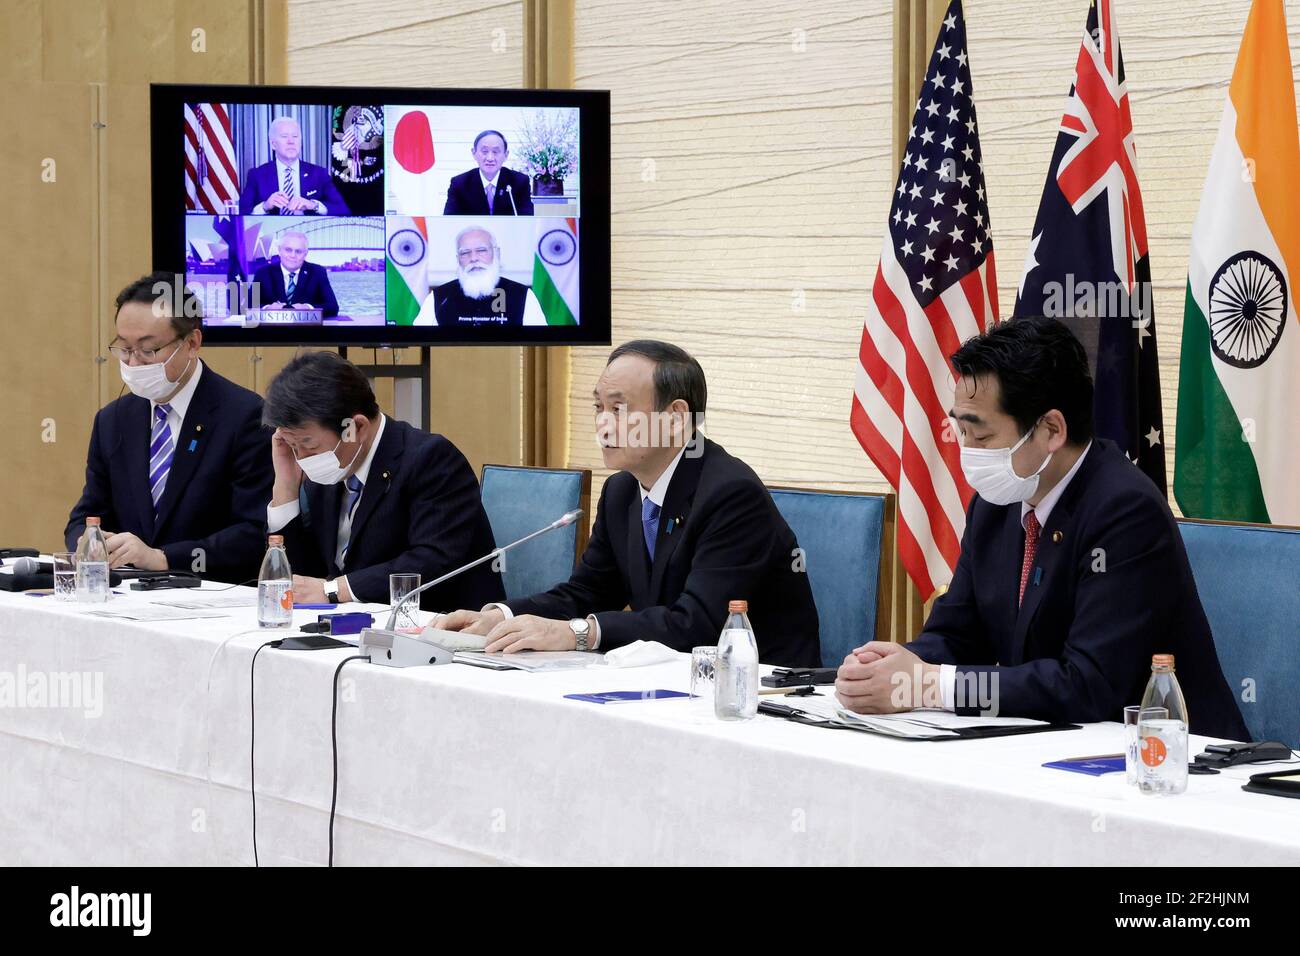 Tokyo, Japan. 12th Mar, 2021. Yoshihide Suga (C) Japanese Prime Minister speaks while a monitor displays U.S. President Joe Biden, Scott Morrison, Australia's Prime Minister, and Narendra Modi, India's Prime Minister, during the Japanese PM attends Virtual Quadrilateral Security Dialogue (Quad) meeting at his official residence in Tokyo, Japan, on Friday, March 12, 2021. Credit: POOL/ZUMA Wire/Alamy Live News Stock Photo